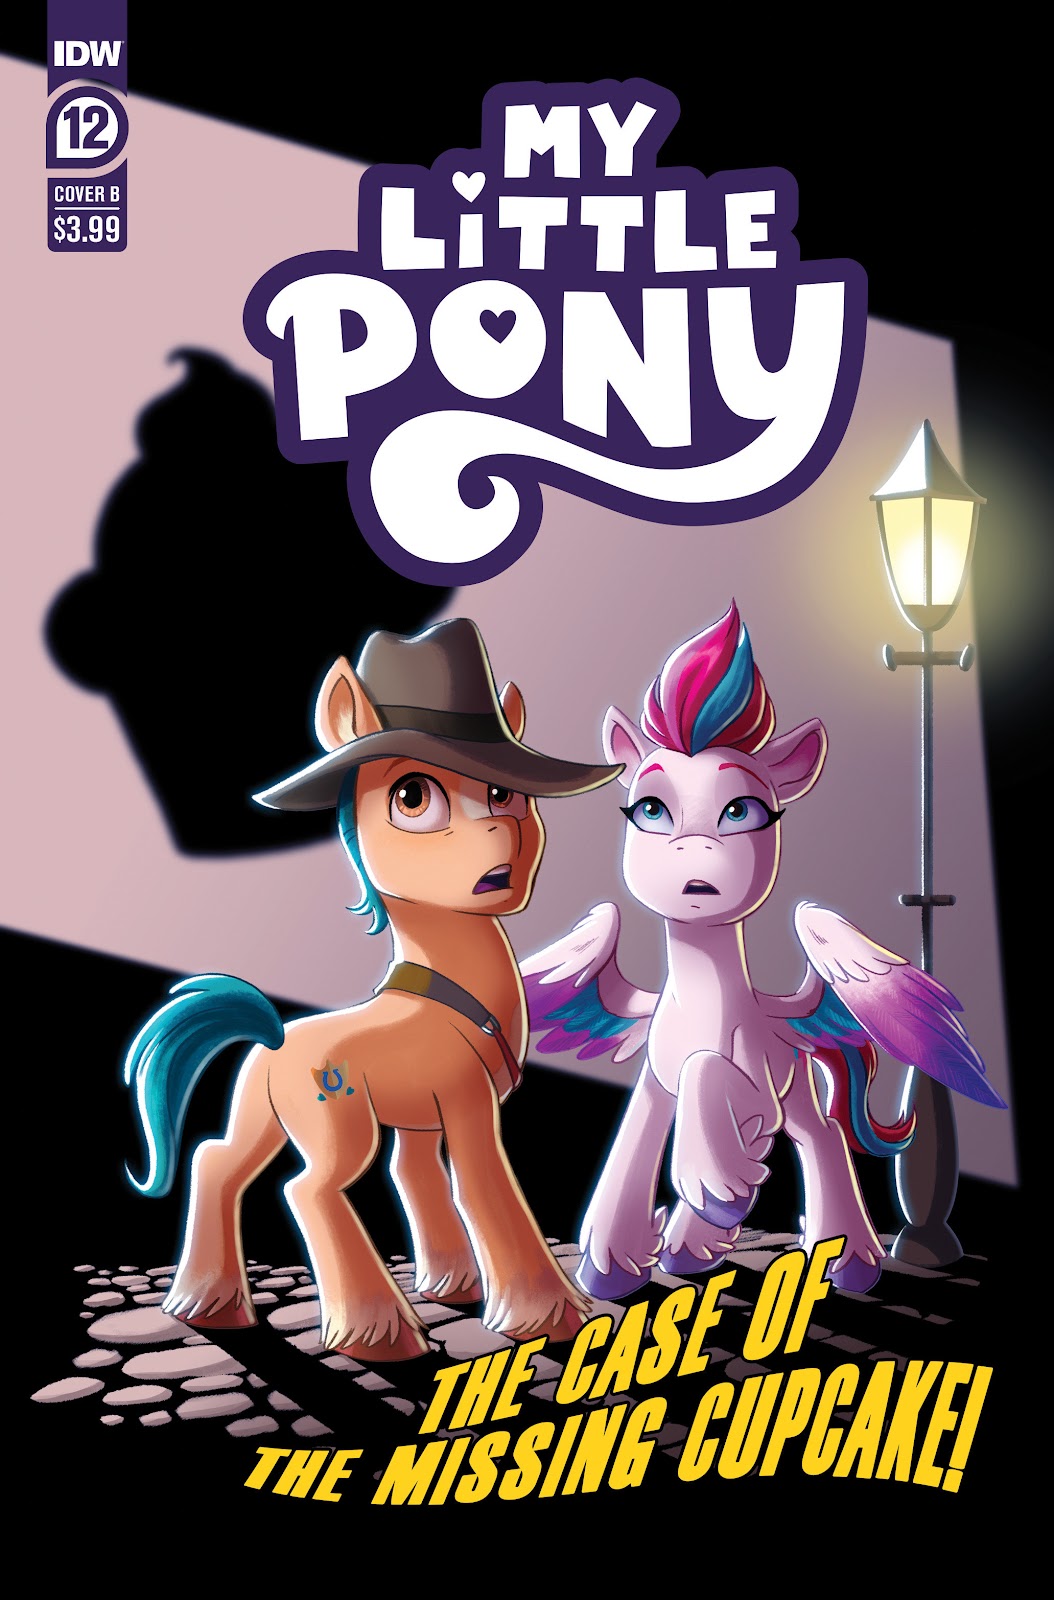 Específico alto Resplandor Equestria Daily - MLP Stuff!: 2-Page Preview For G5 My Little Pony #12  Comic Revealed